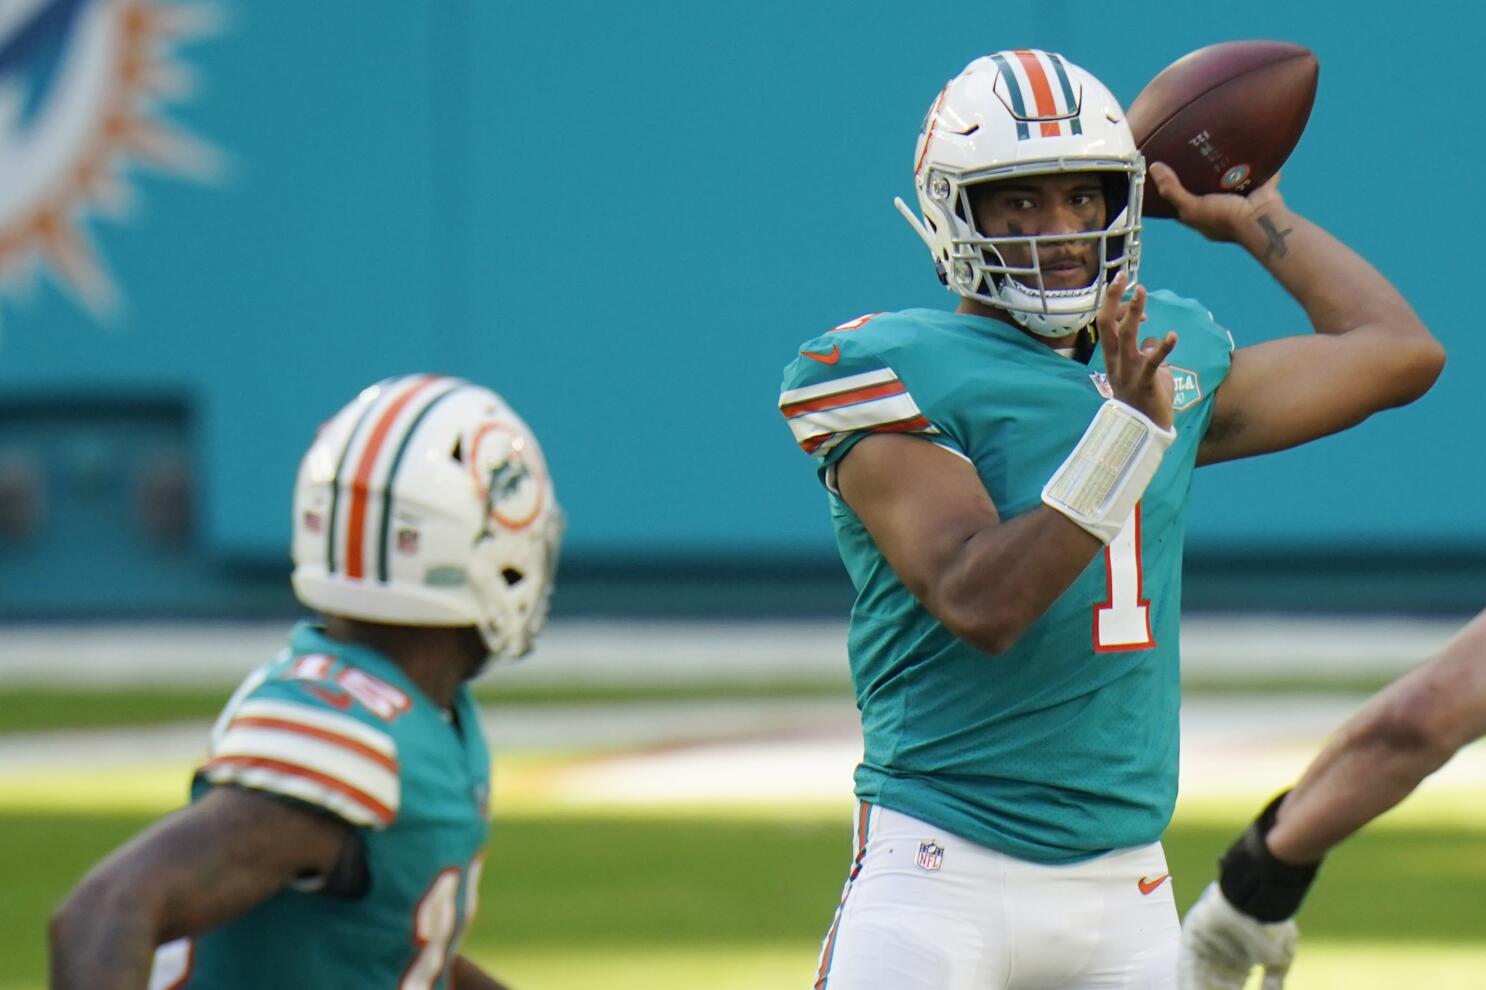 Quick observations from Patriots' Week 2 loss to Dolphins.